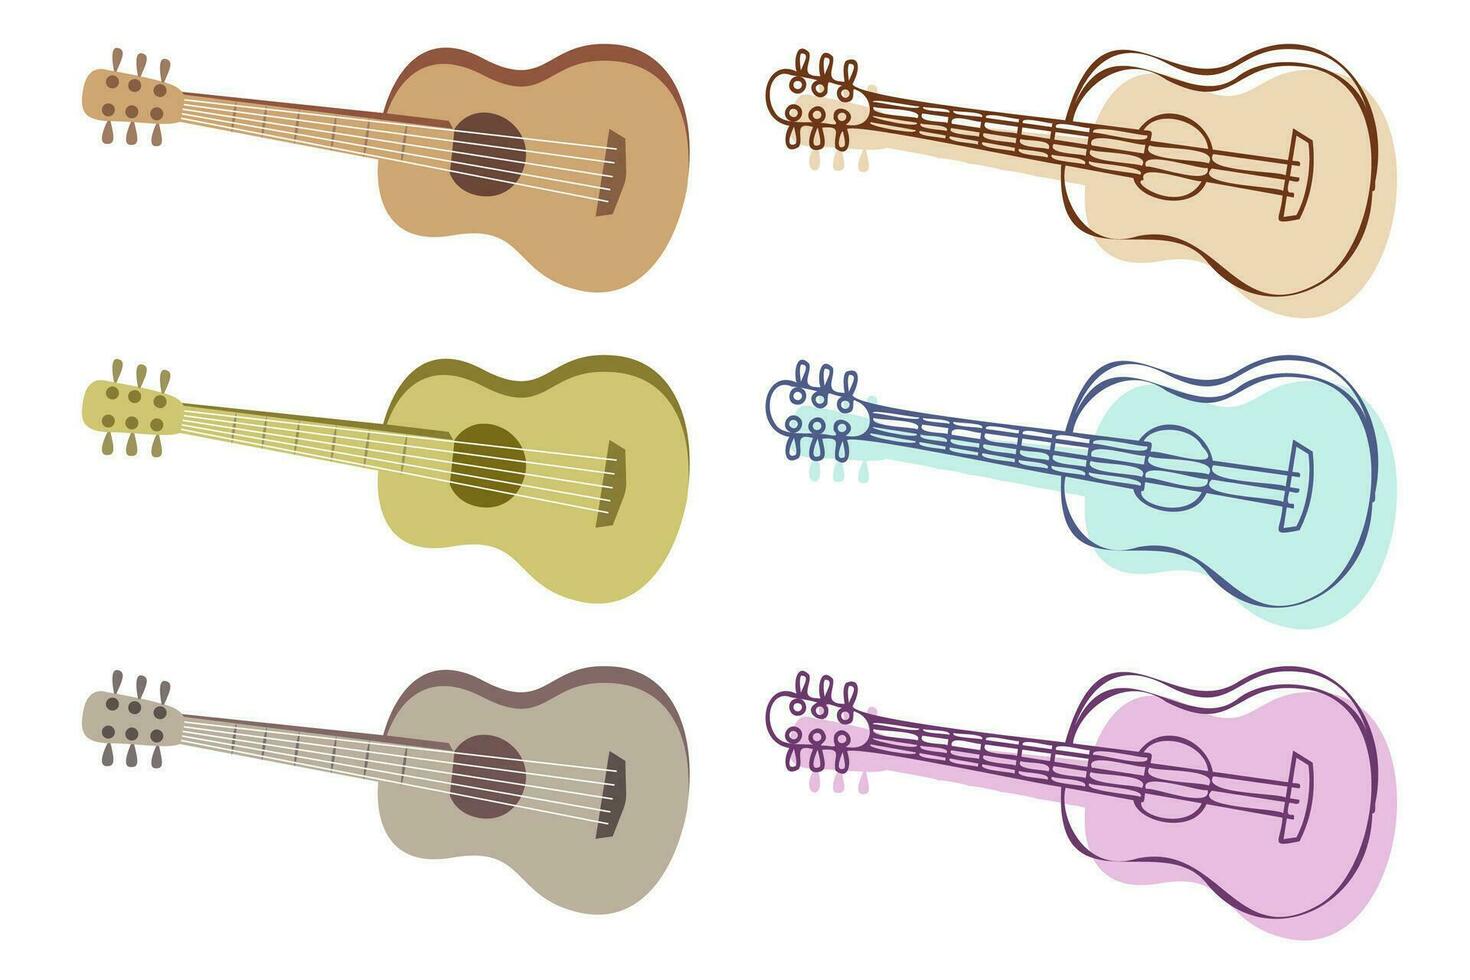 Guitar colorful illustration set. Acoustic guitars realistic and decorative illustration collection. vector